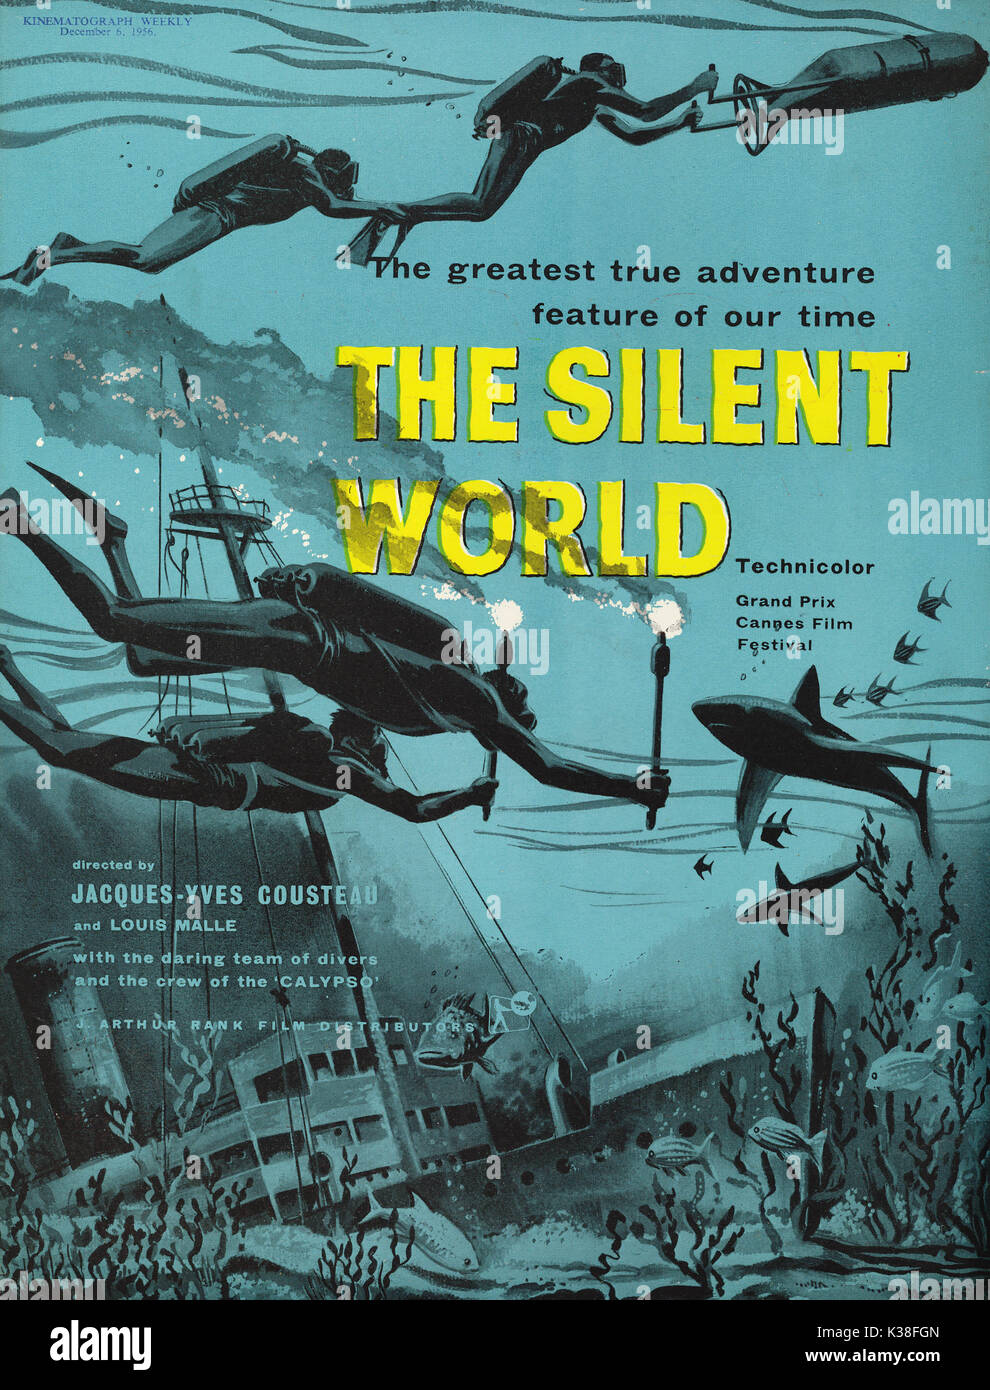 THE SILENT WORLD aka LE MONDE DU SILENCE  DIRECTORS: JACQUES-YVES COUSTEAU/LOUIS MALLE POSTER FROM THE RONALD GRANT ARCHIVE Stock Photo